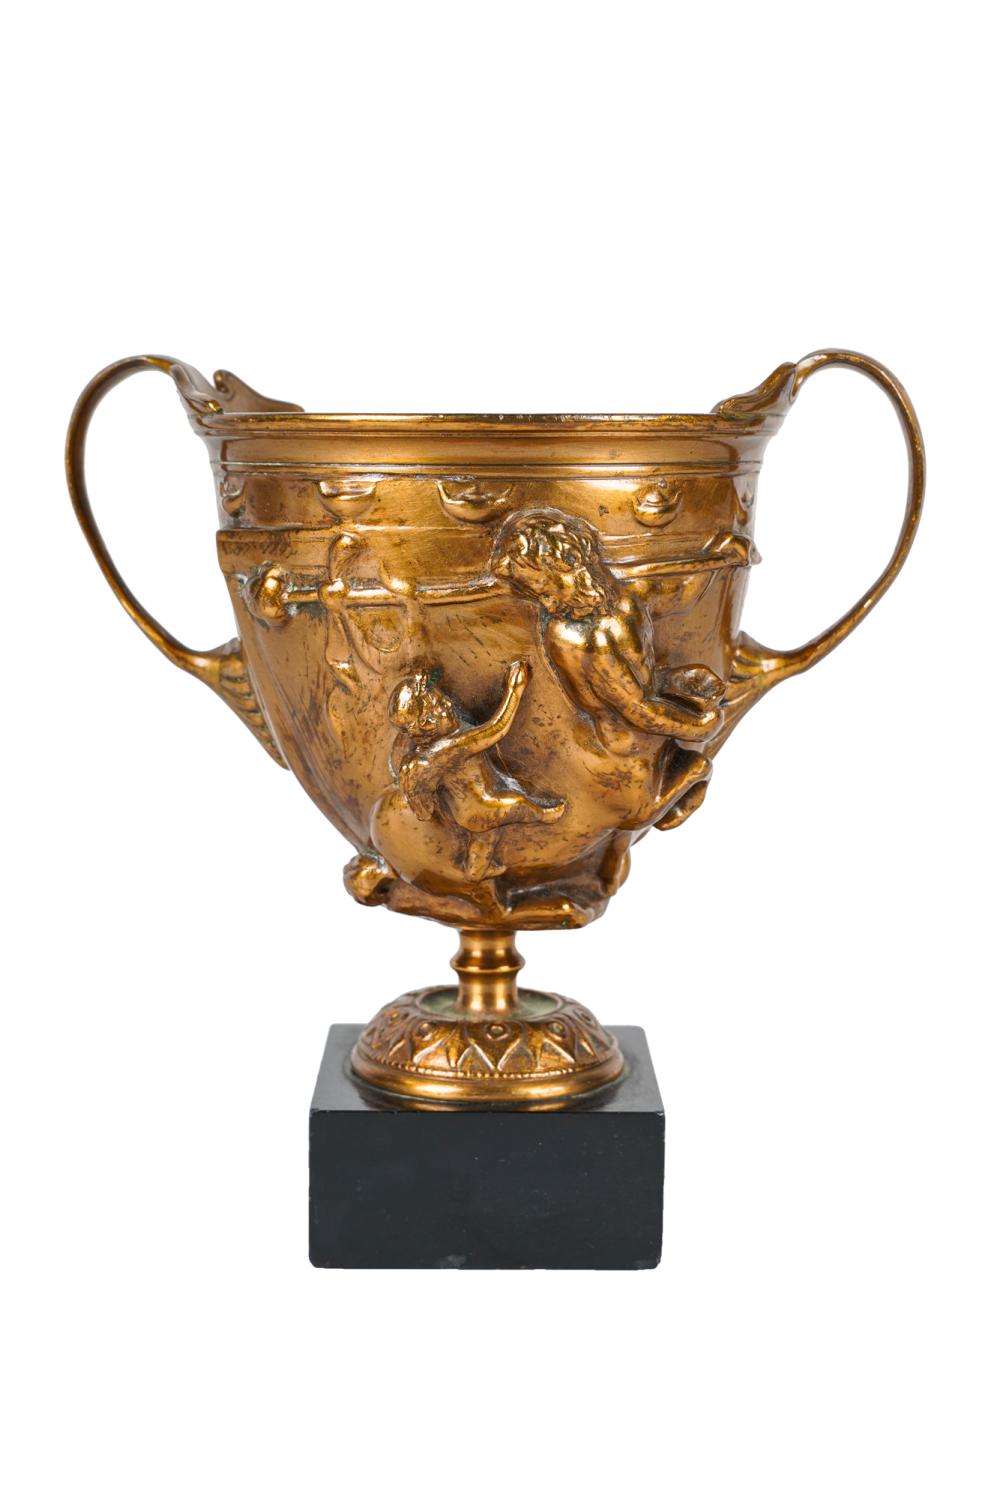 GILT-BRONZE CHALICEdecorated with